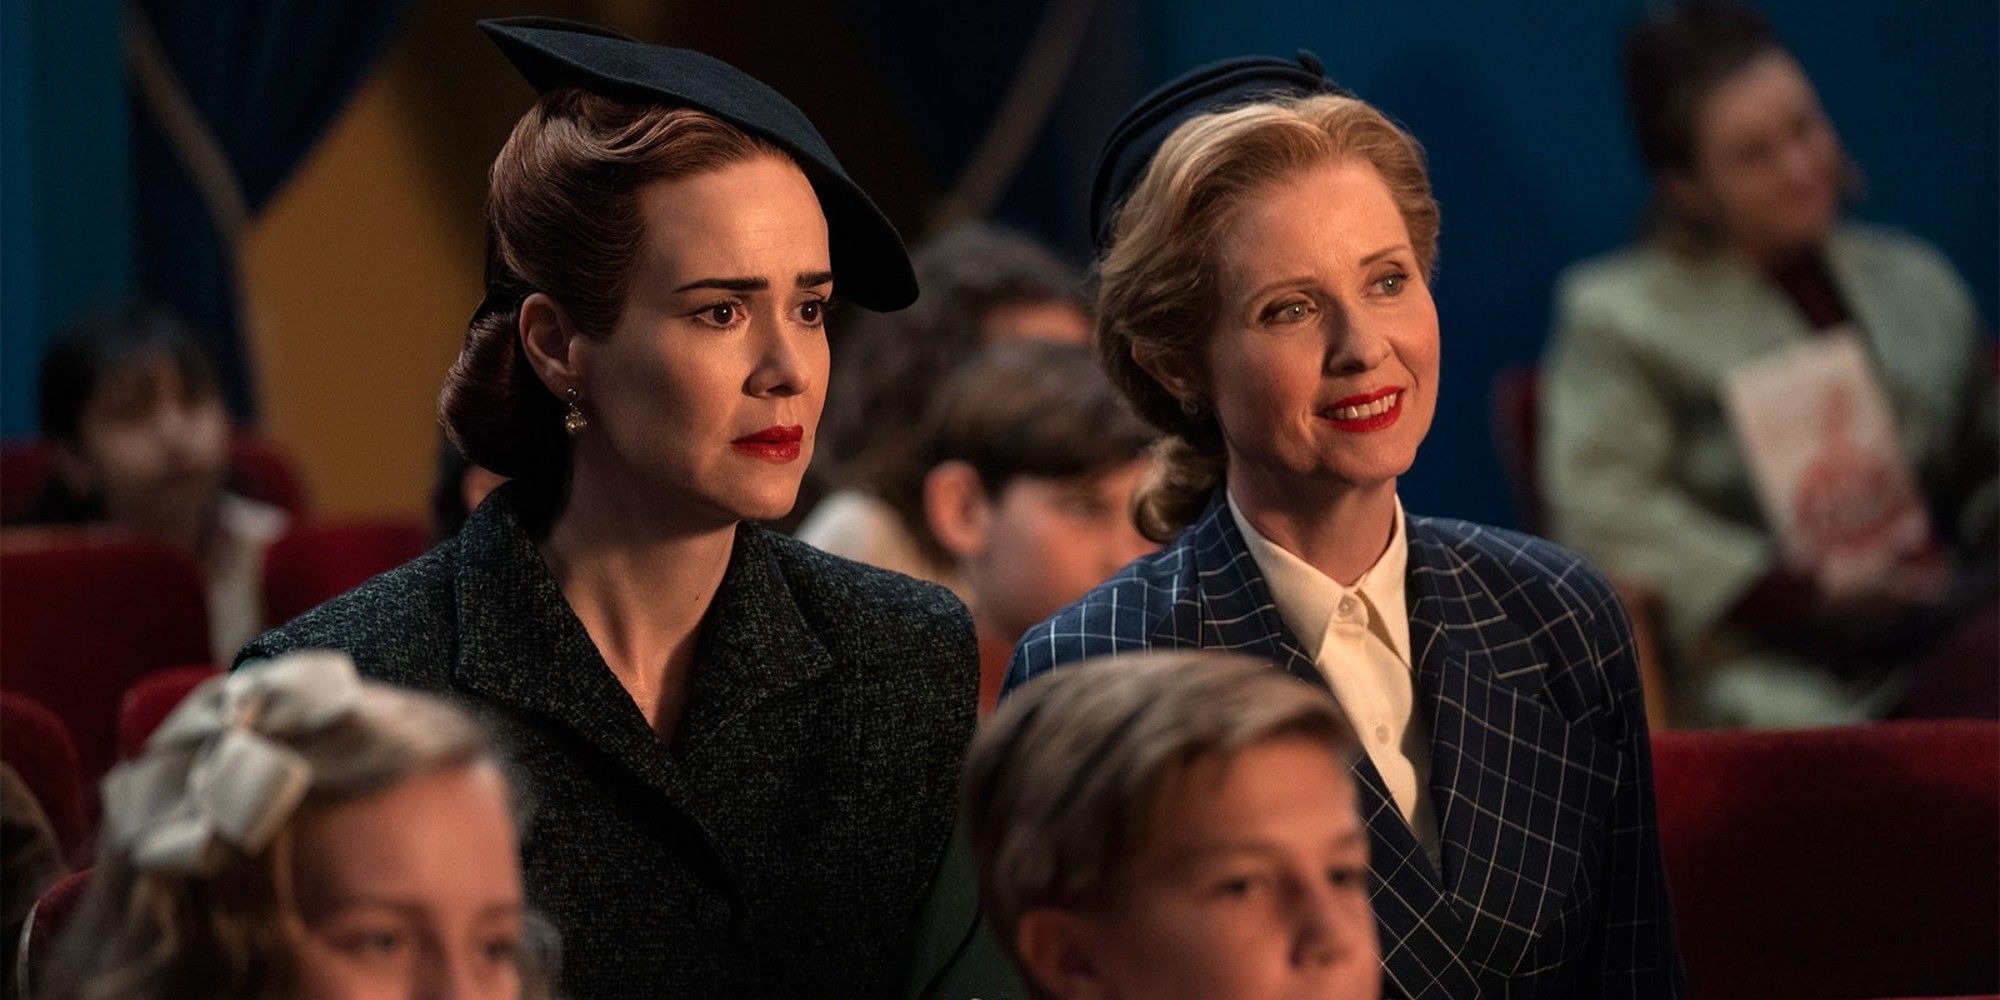 Sarah Paulson as Mildred Ratched and Cynthia Nixon as Gwendoline watch a puppet show in Ratched